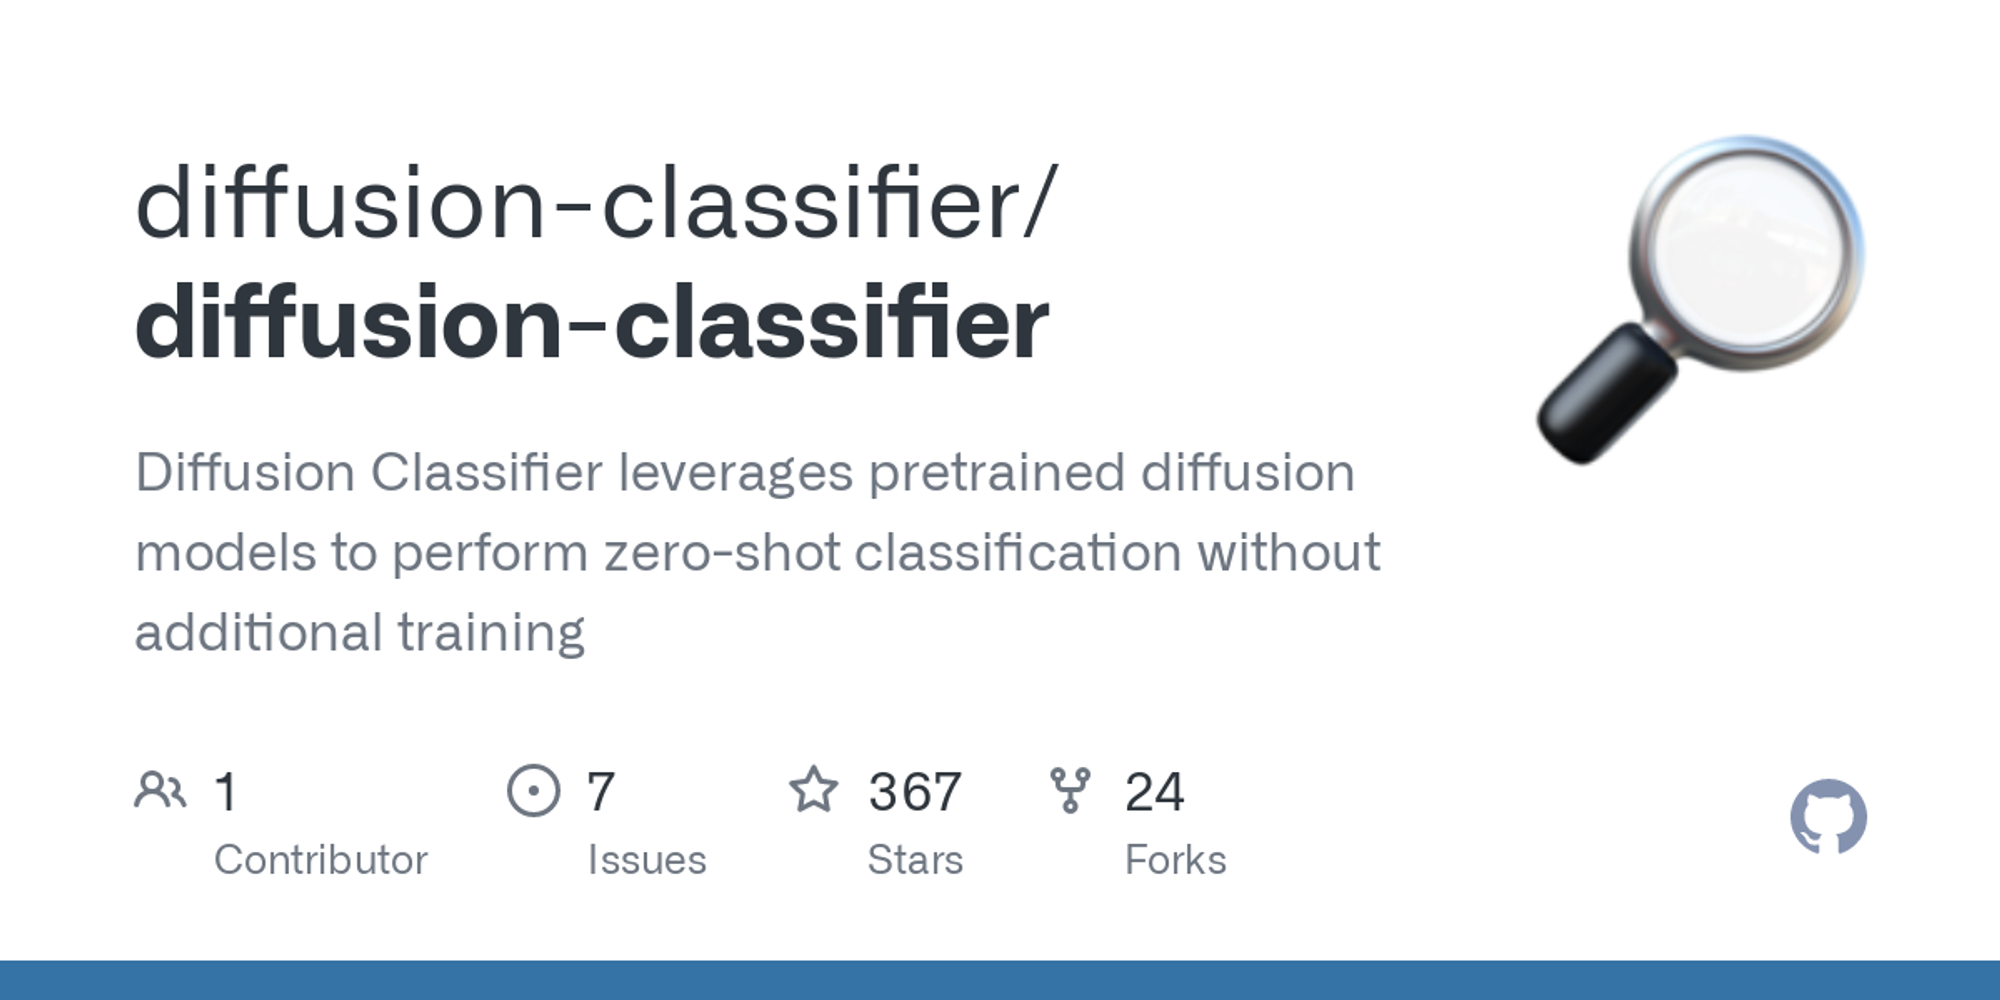 GitHub - diffusion-classifier/diffusion-classifier: Diffusion Classifier leverages pretrained diffusion models to perform zero-shot classification without additional training